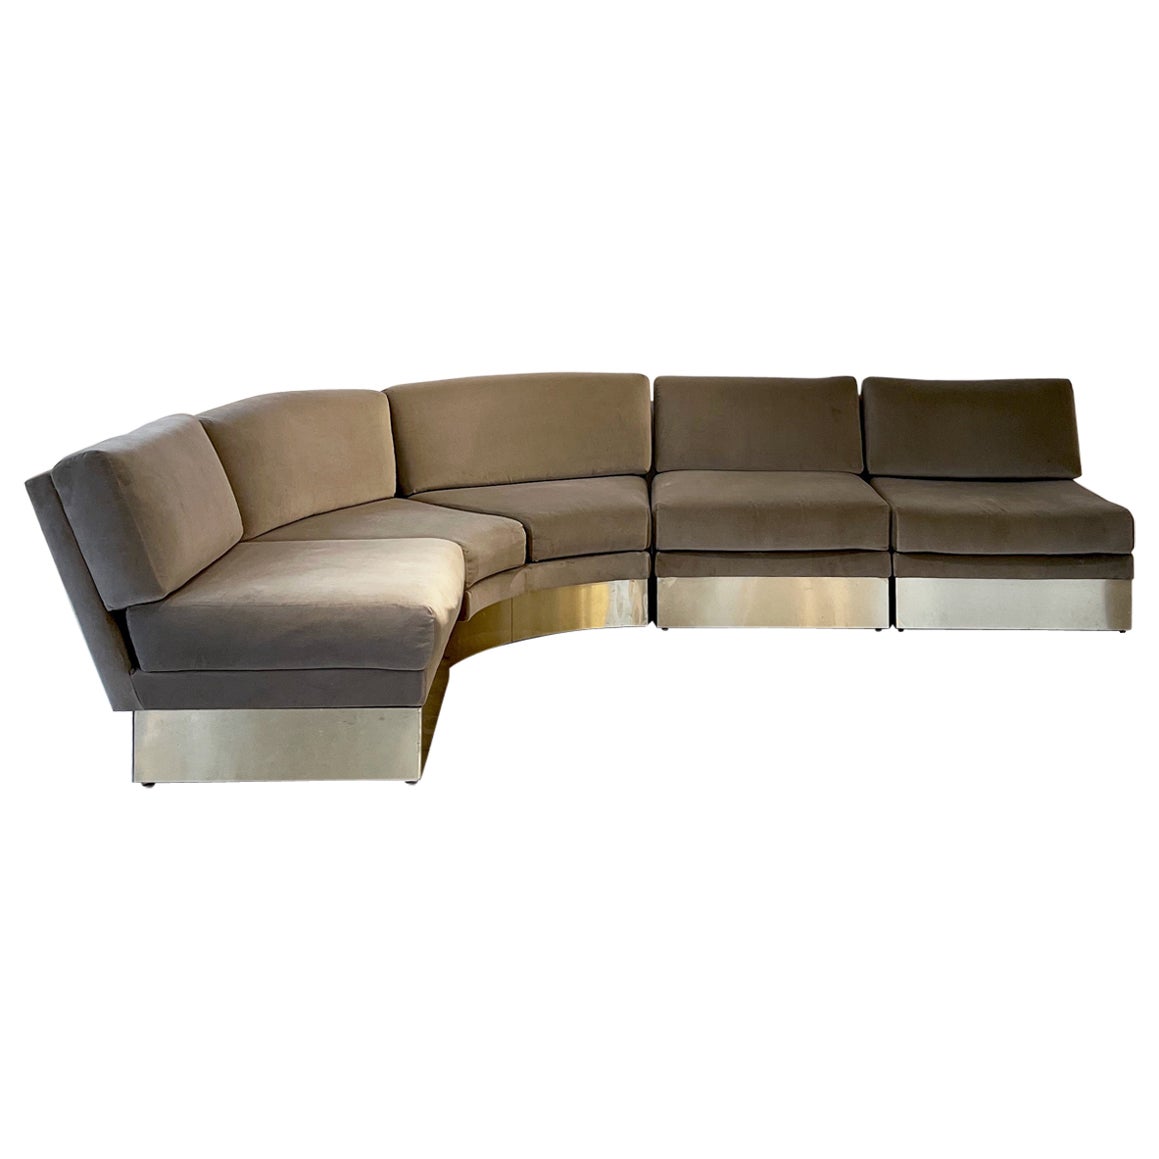 California Corner sofa by Jacques Charpentier from the 1970s